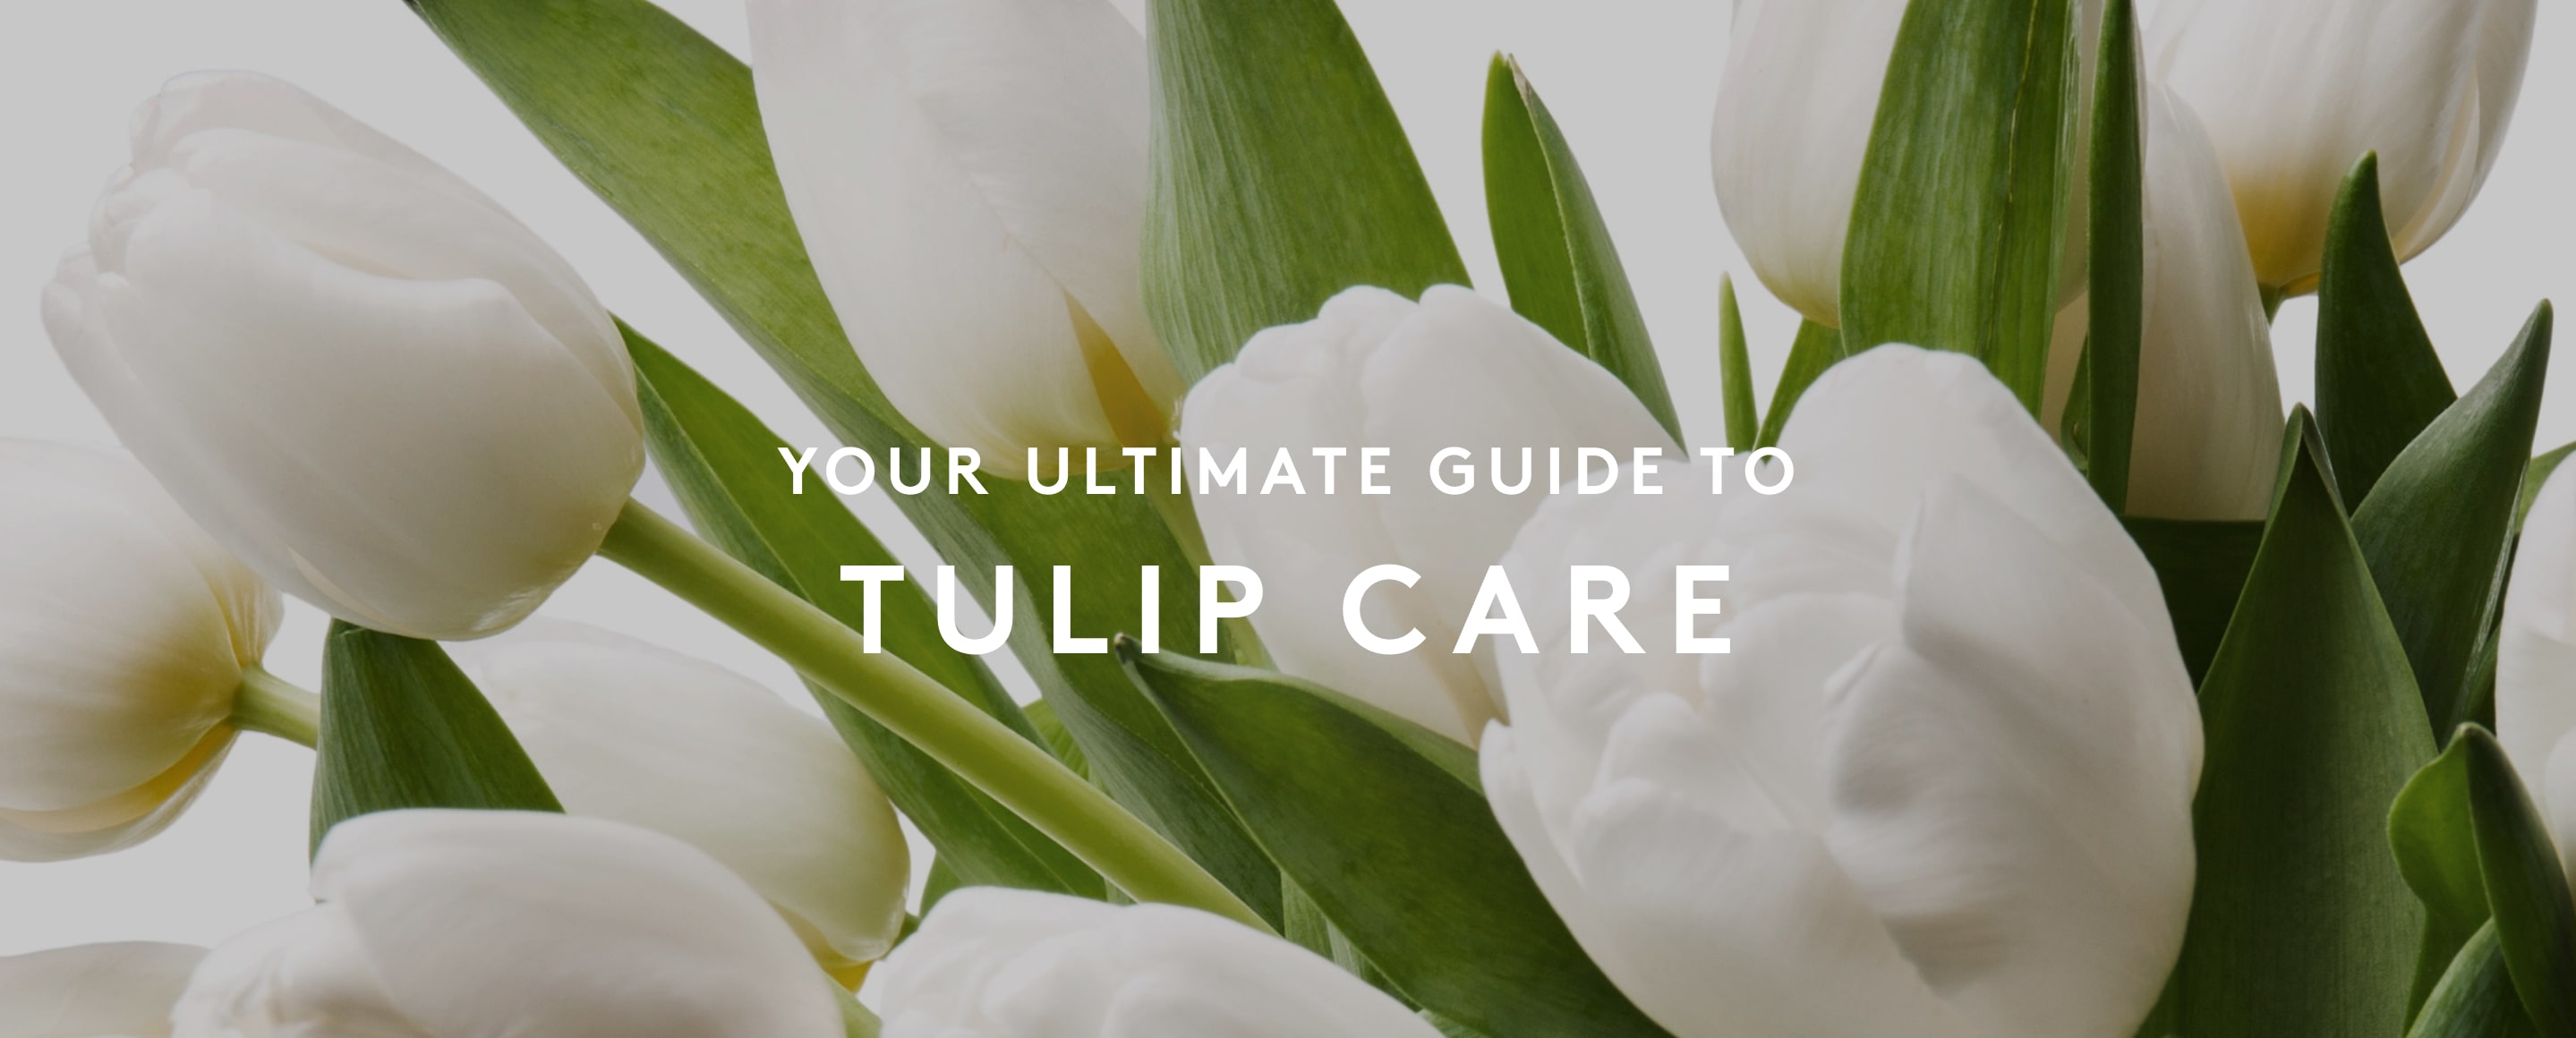 Your ultimate guide to tulip care